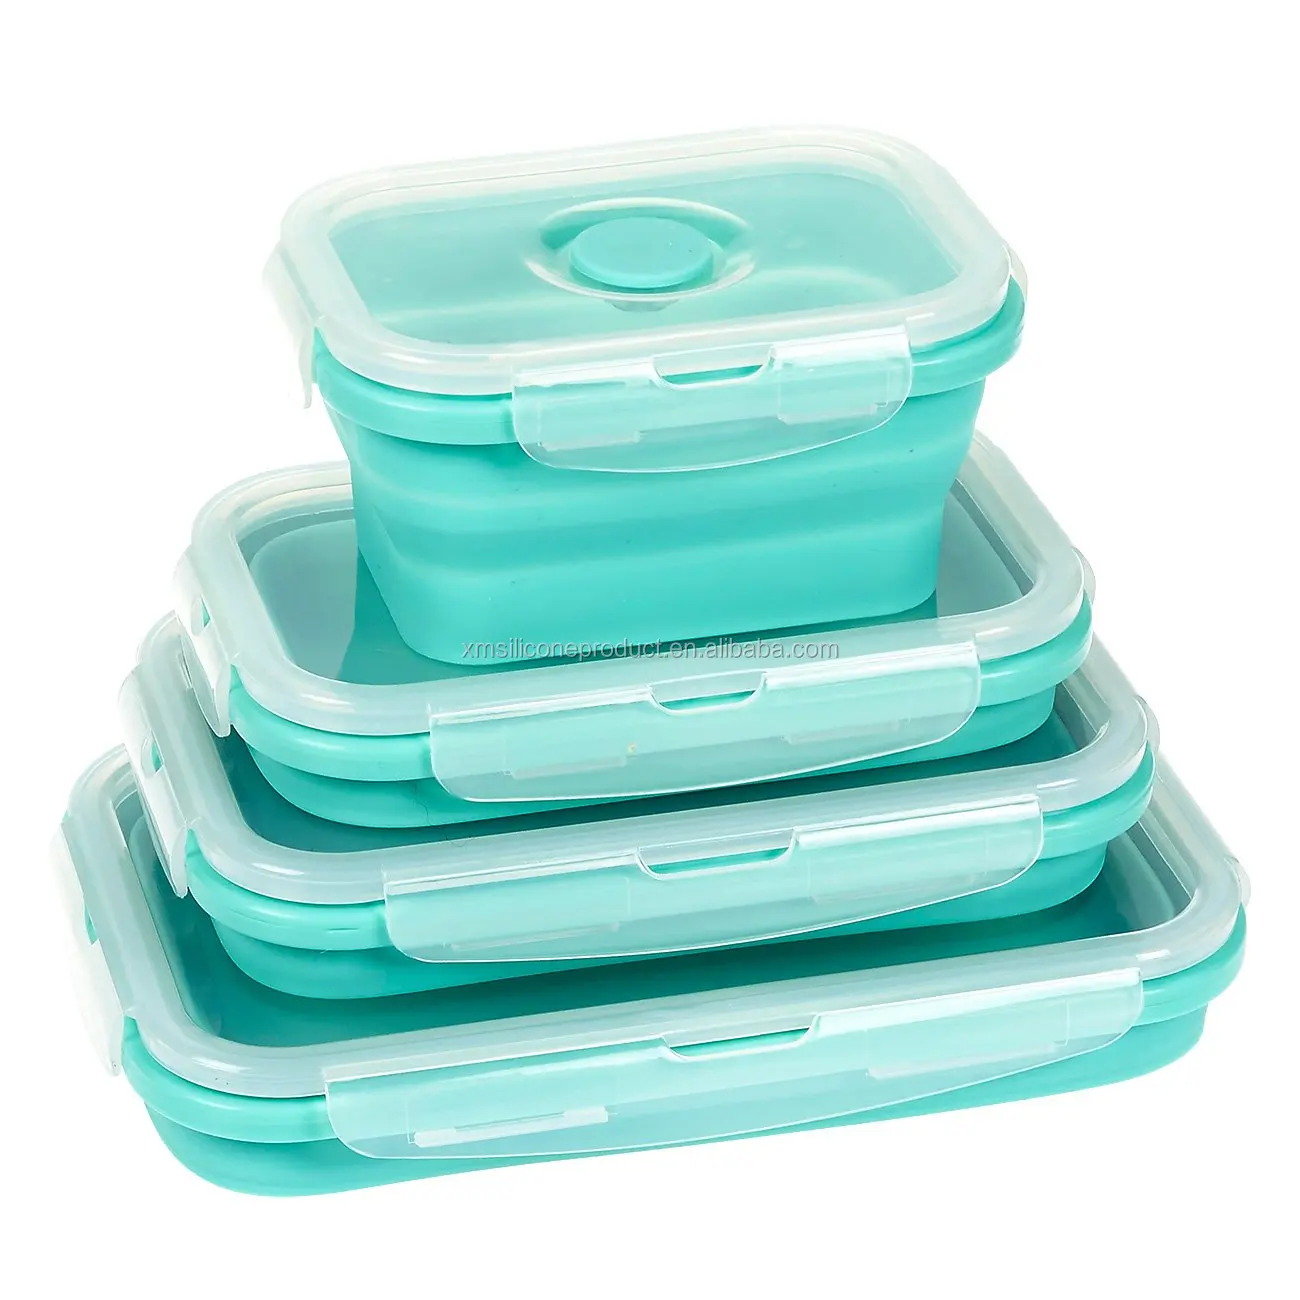 

Collapsible Containers Folding Food Storage 4 Silicone tiffin lunch box bento, Red / green /blue/yellow / any color is available